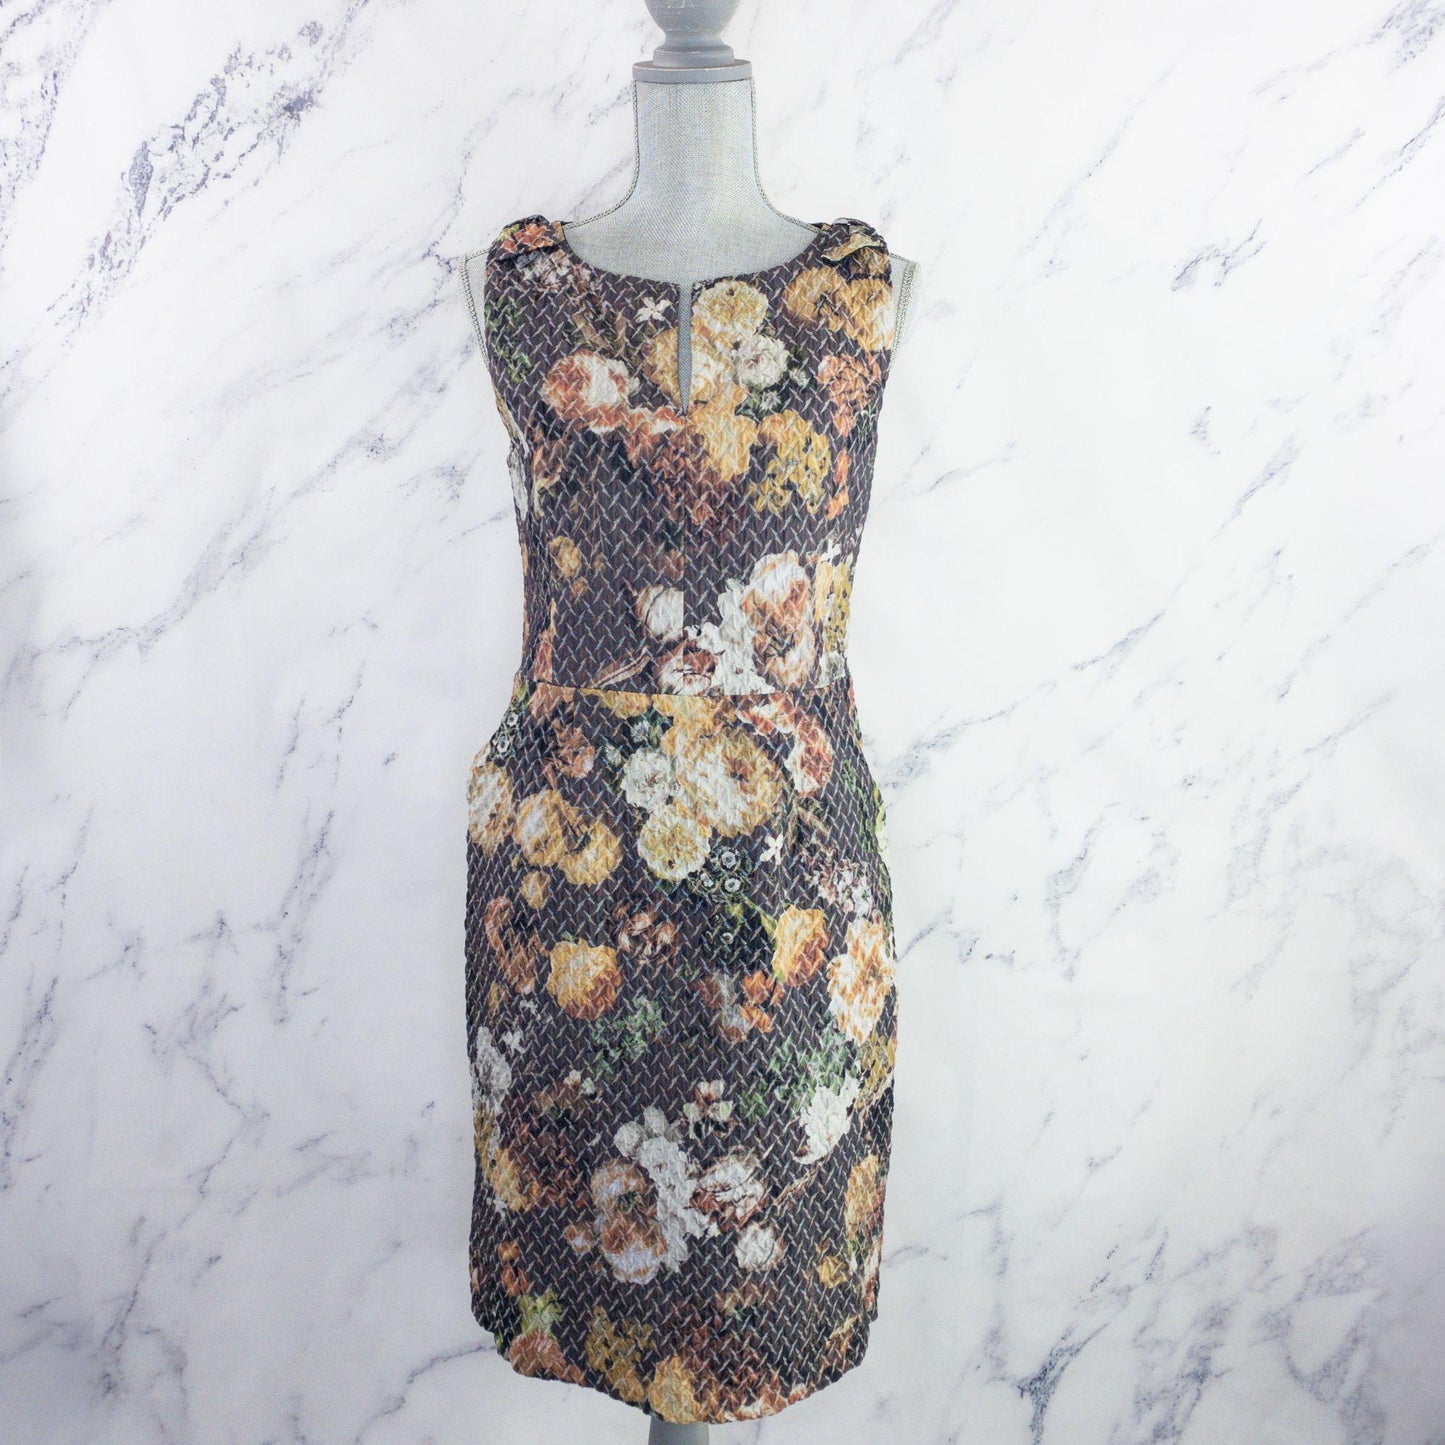 Anthropologie x Tabitha | Floral Quilted Tema Dress | Sz 10